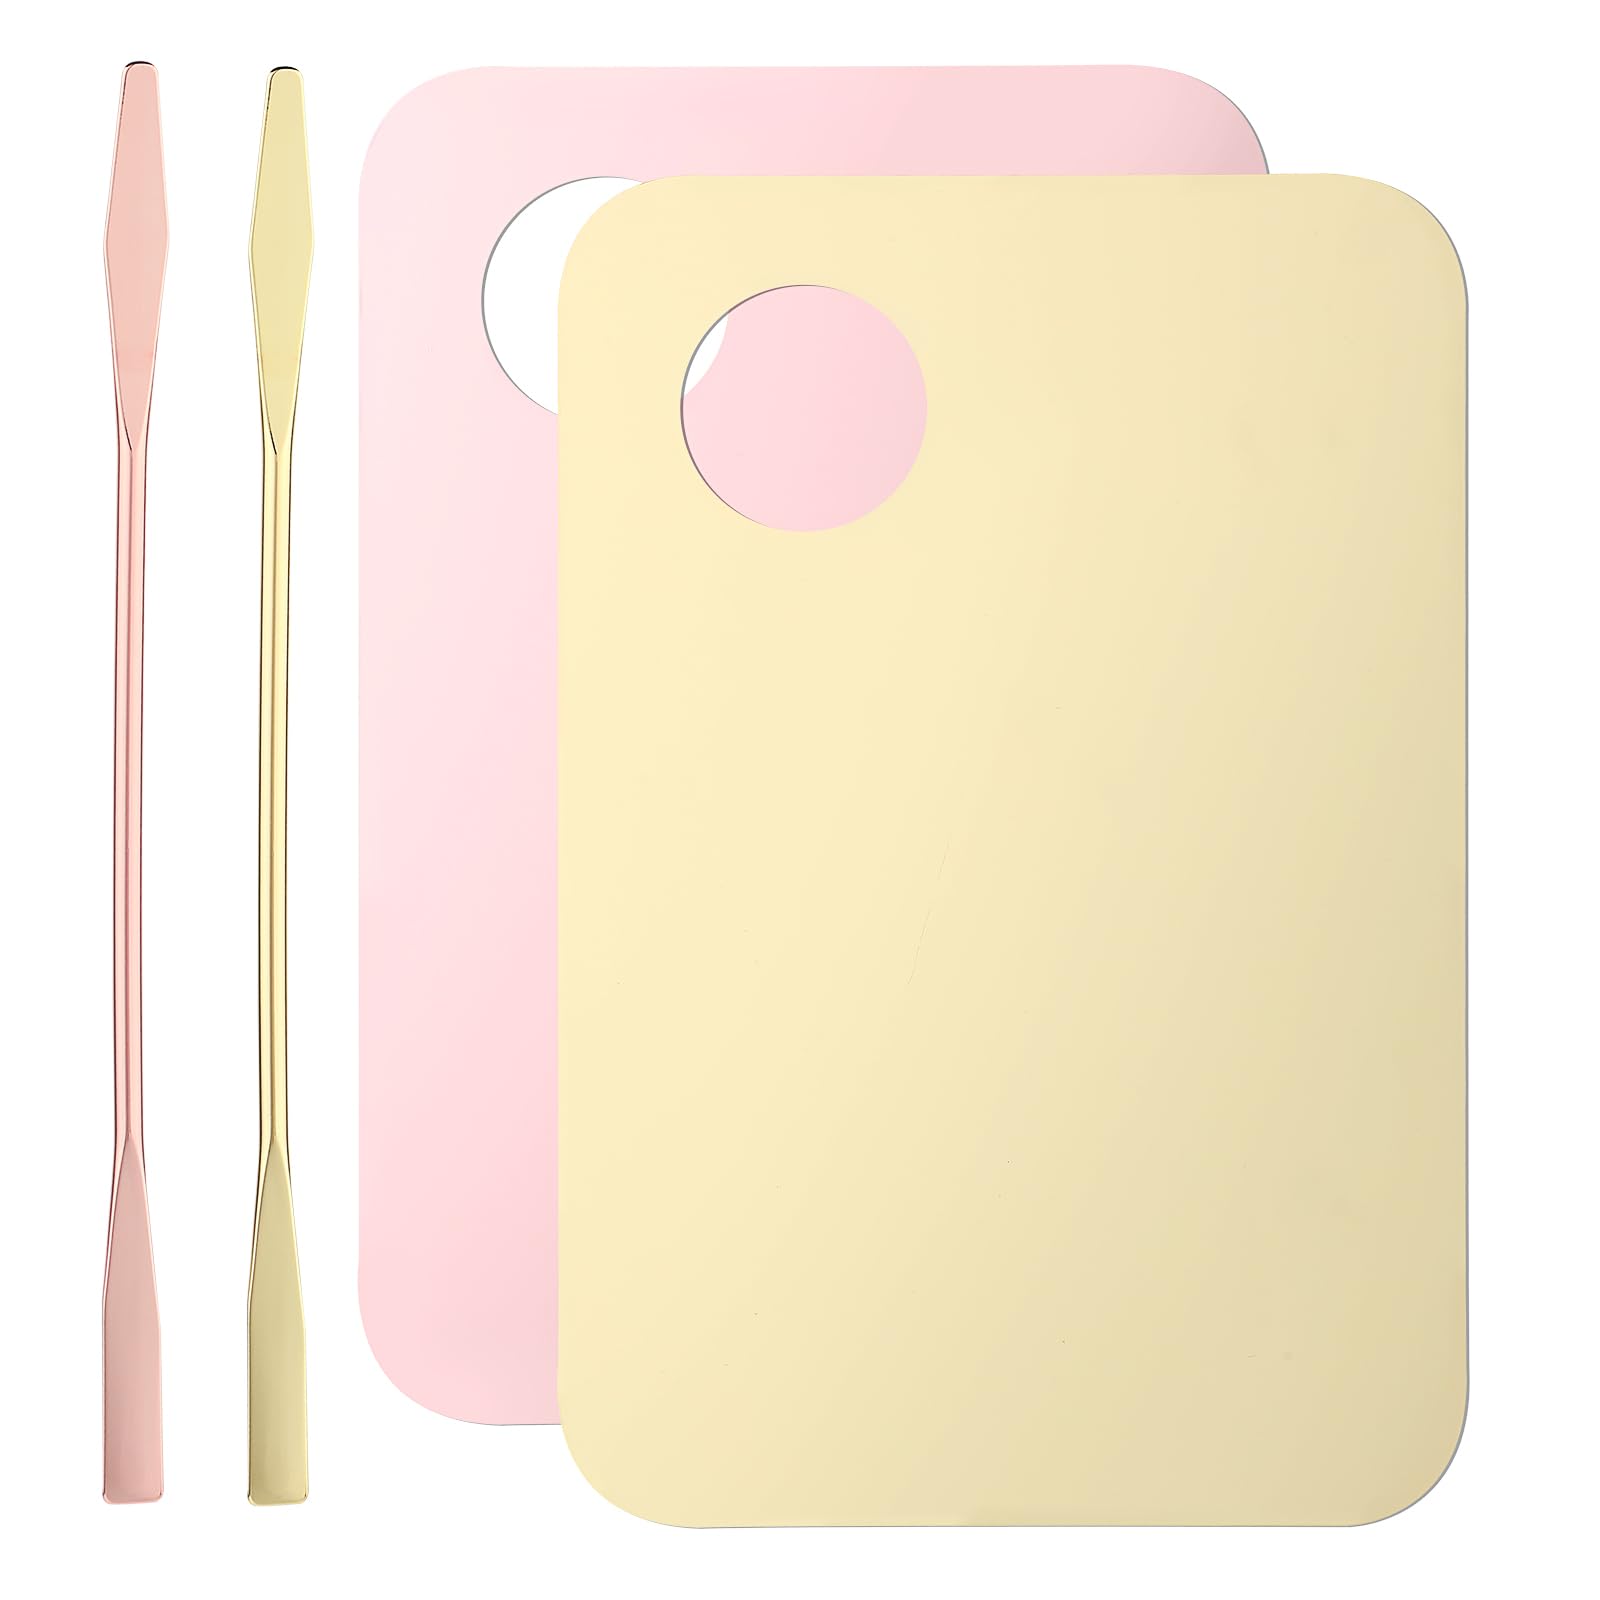 2 Pcs Makeup Blending Tray With 2 Pcs Gold Makeup Spatula Acrylic Cosmetic Makeup Palette Foundation Mixing Tray For Nail Art Beauty Salon Color Cream Liquid Professional Pigment Blending